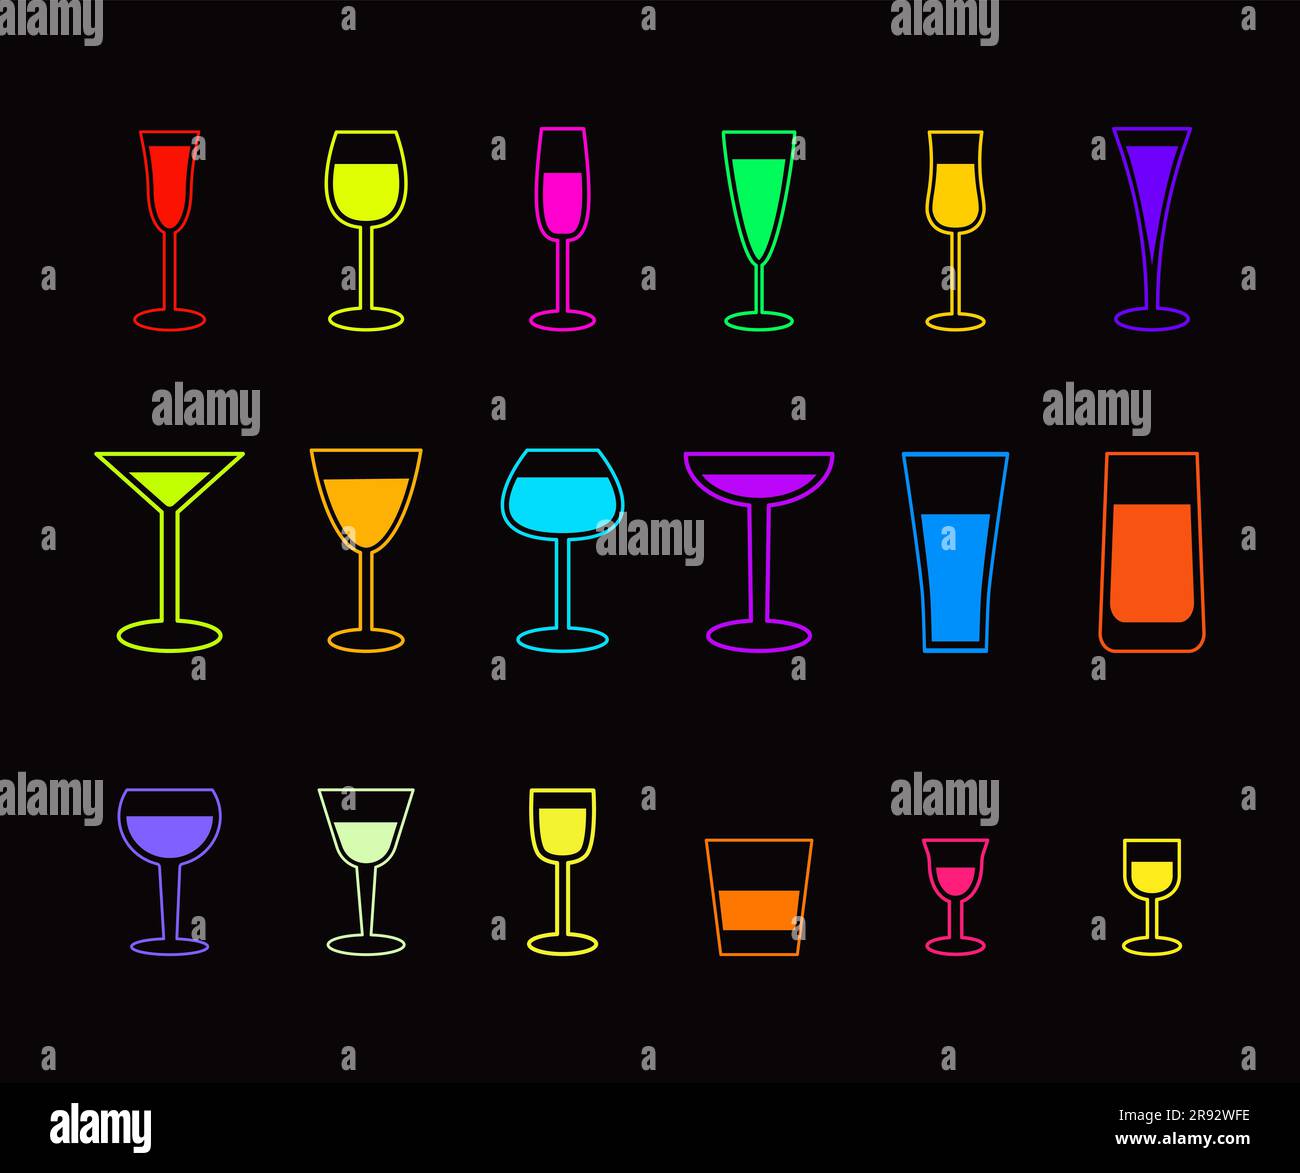 https://c8.alamy.com/comp/2R92WFE/neon-colored-different-glasses-of-cocktails-alcohol-drink-champagne-line-icon-set-vector-illustration-isolated-on-black-background-2R92WFE.jpg